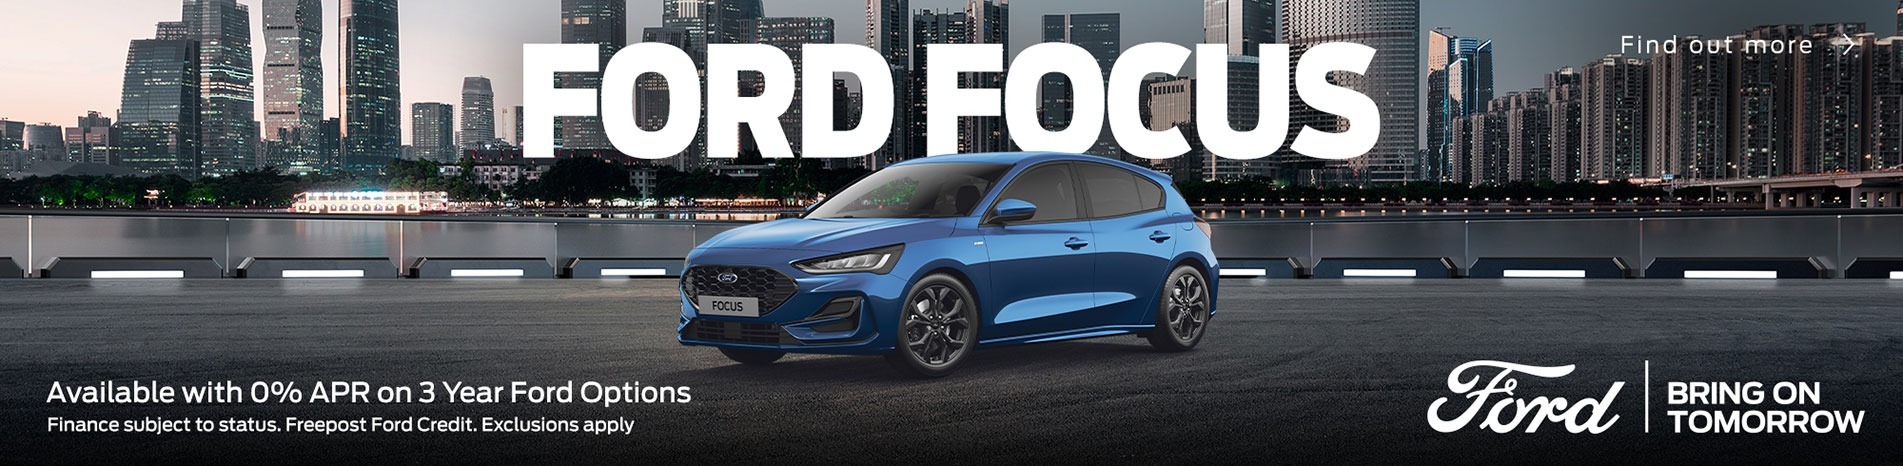 Ford Focus 0% APR on 3 Year Ford Options